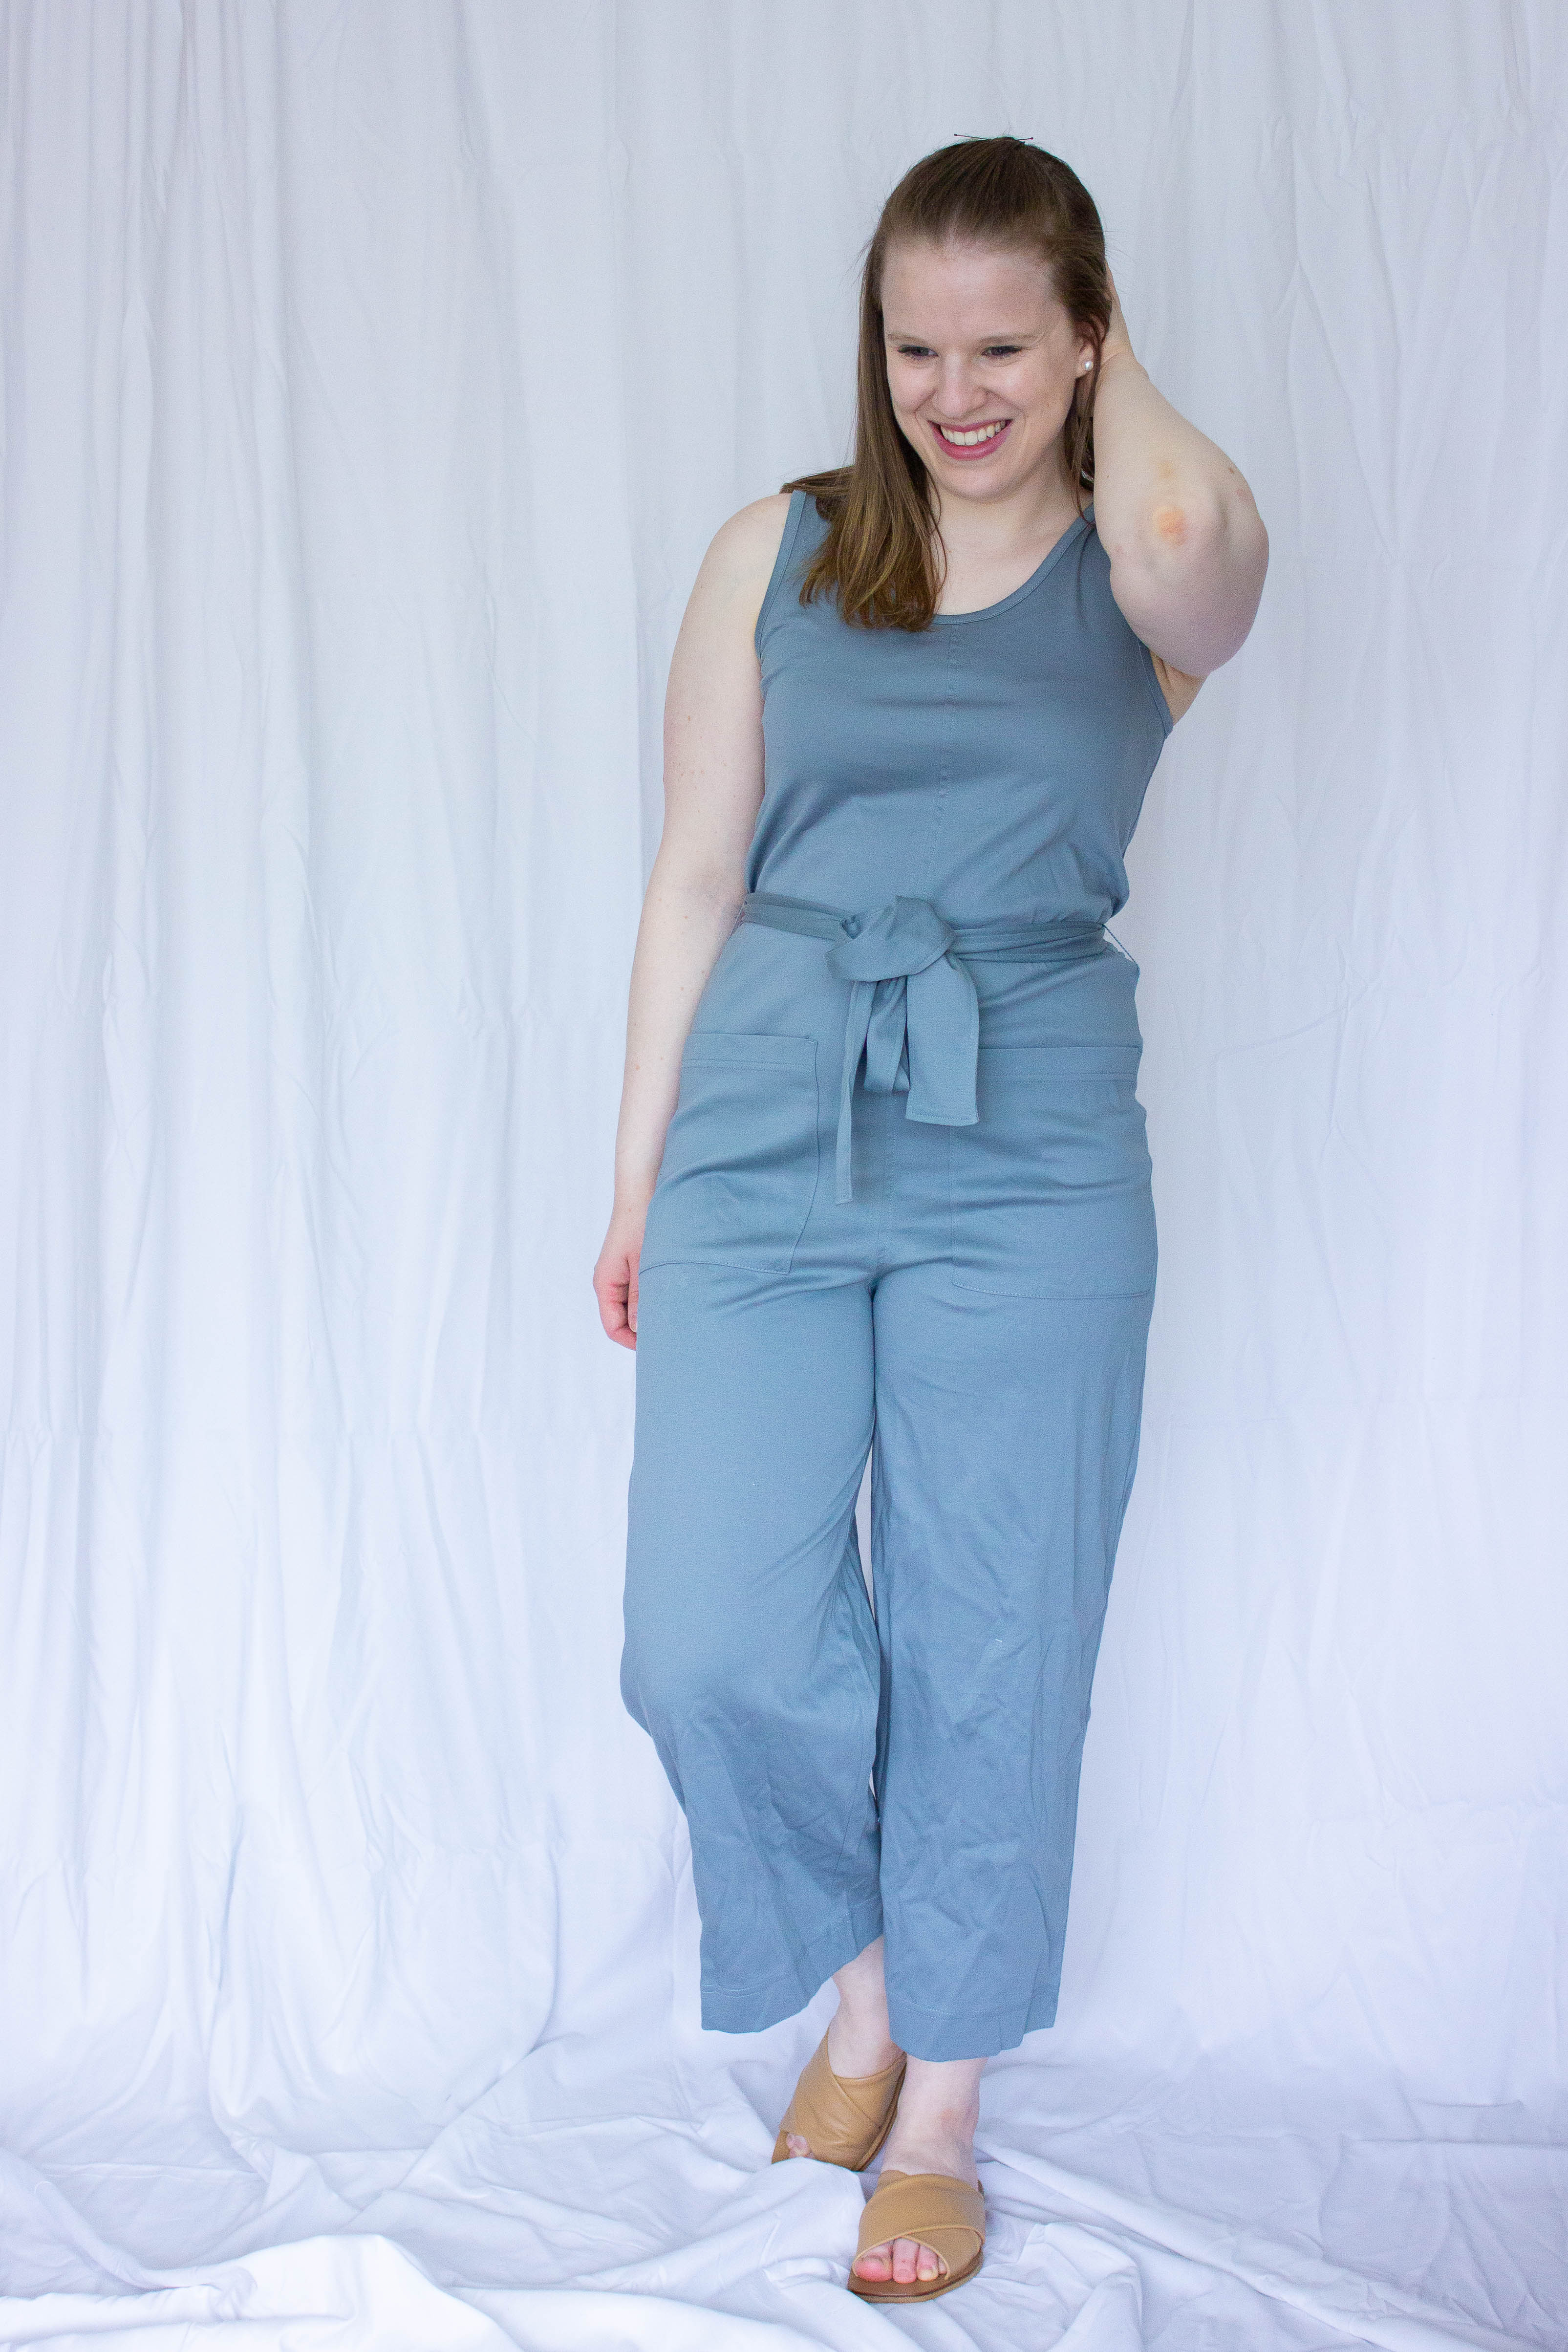 DC woman blogger wearing Everlane the Luxe Cotton Jumpsuit